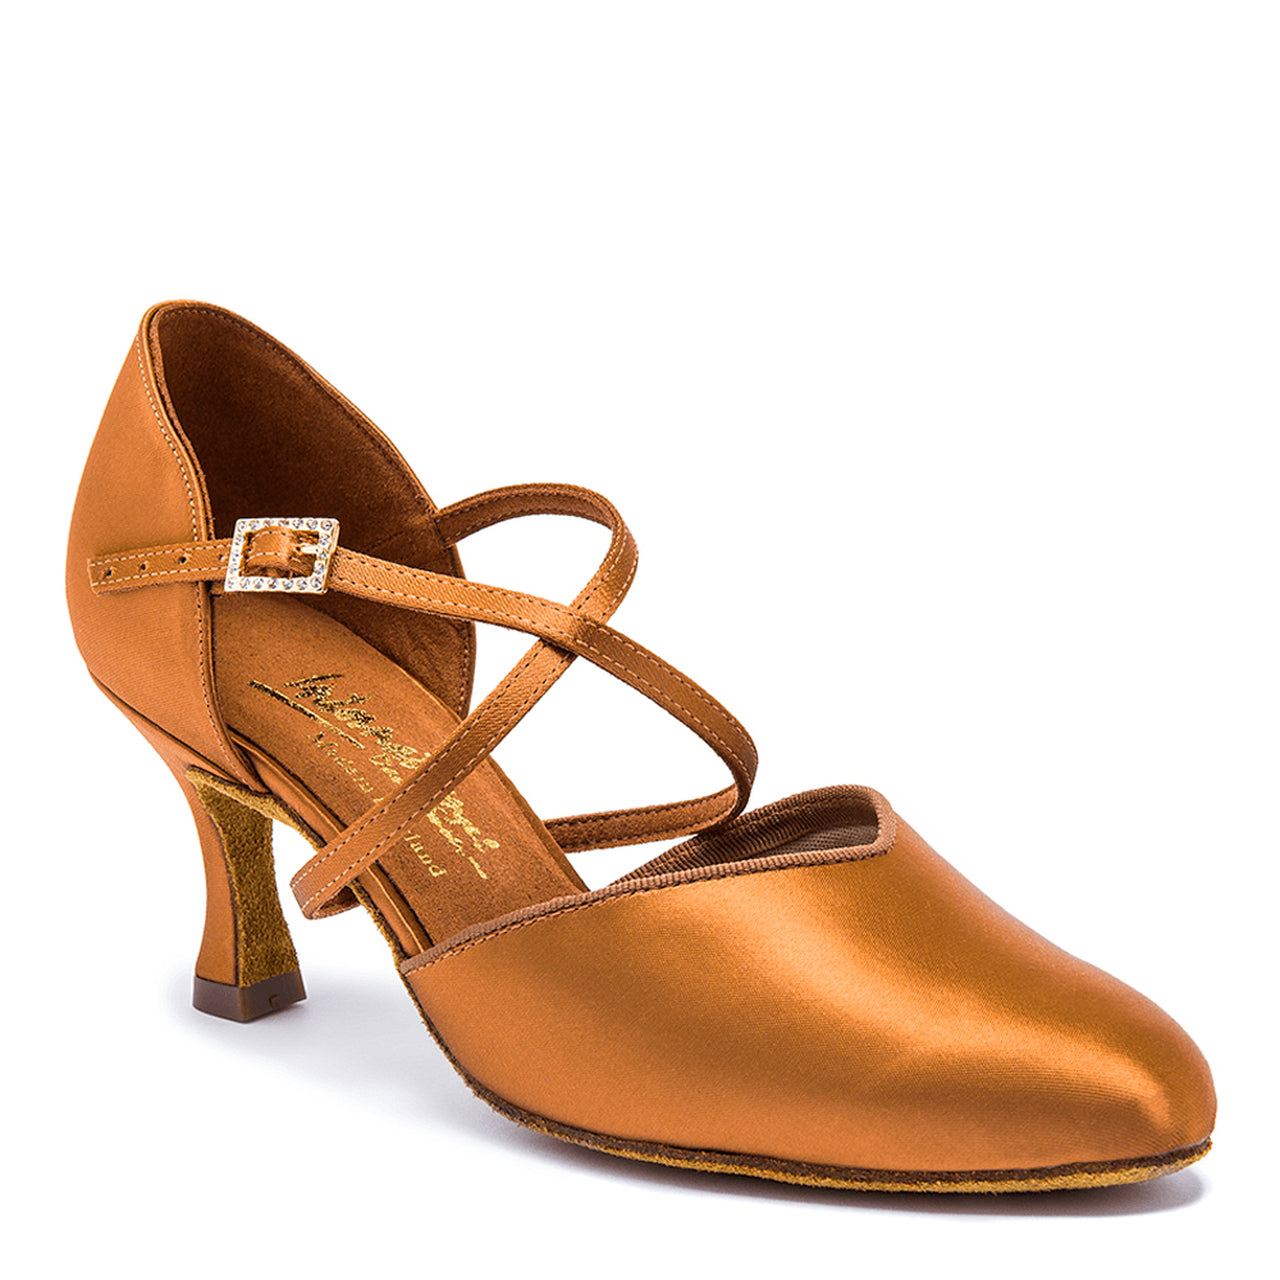 American Style International Dance Shoes IDS Ladies Ballroom Shoe Available in Multiple Colors and Heel Types AMERICAN SMOOTH